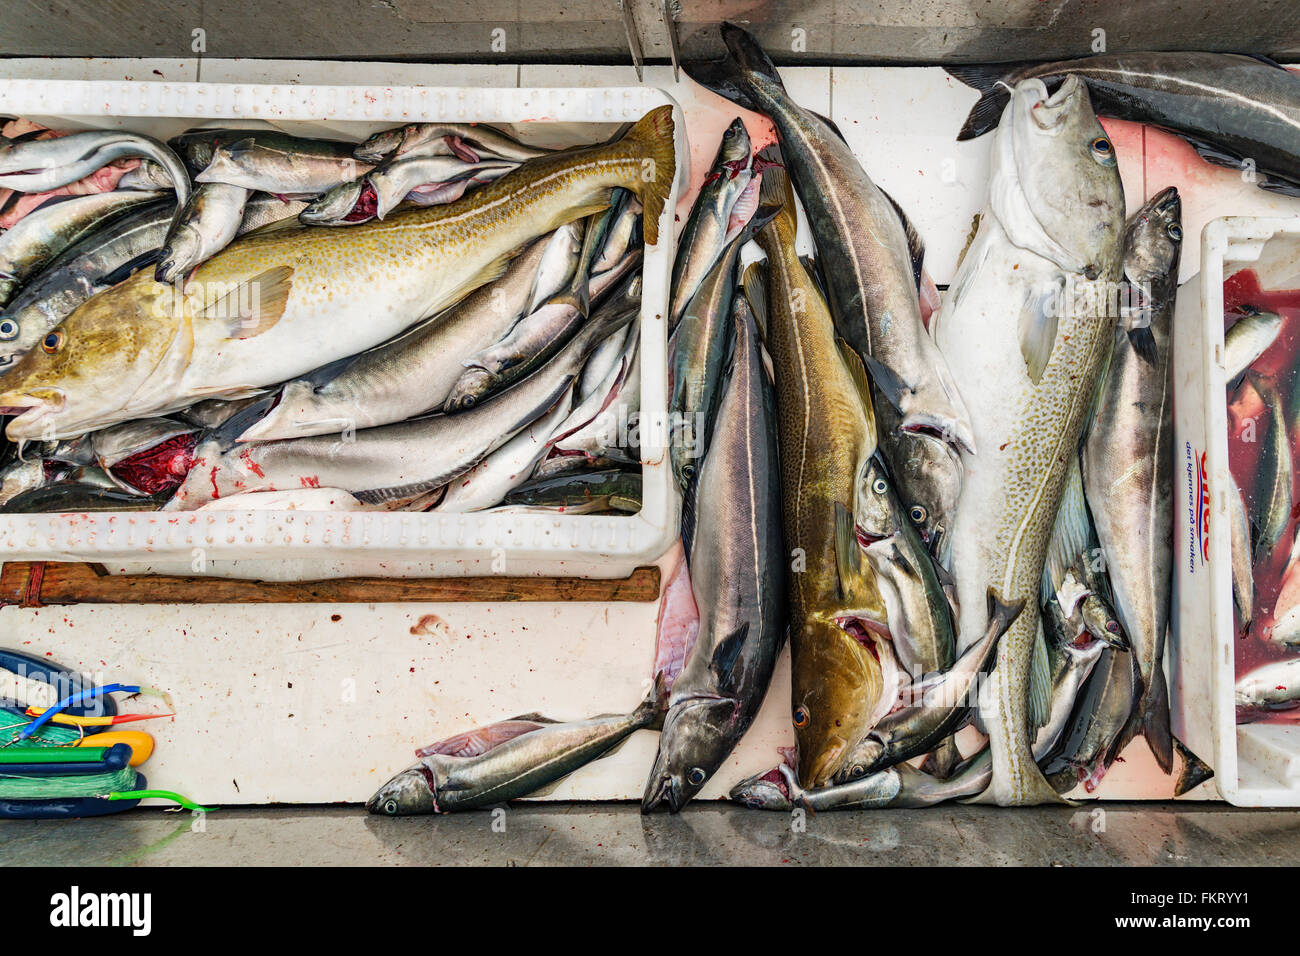 Catch of a 2-hour fishing trip includes several boxes of coalfish and cod. Lofoten islands, Norway. Stock Photo